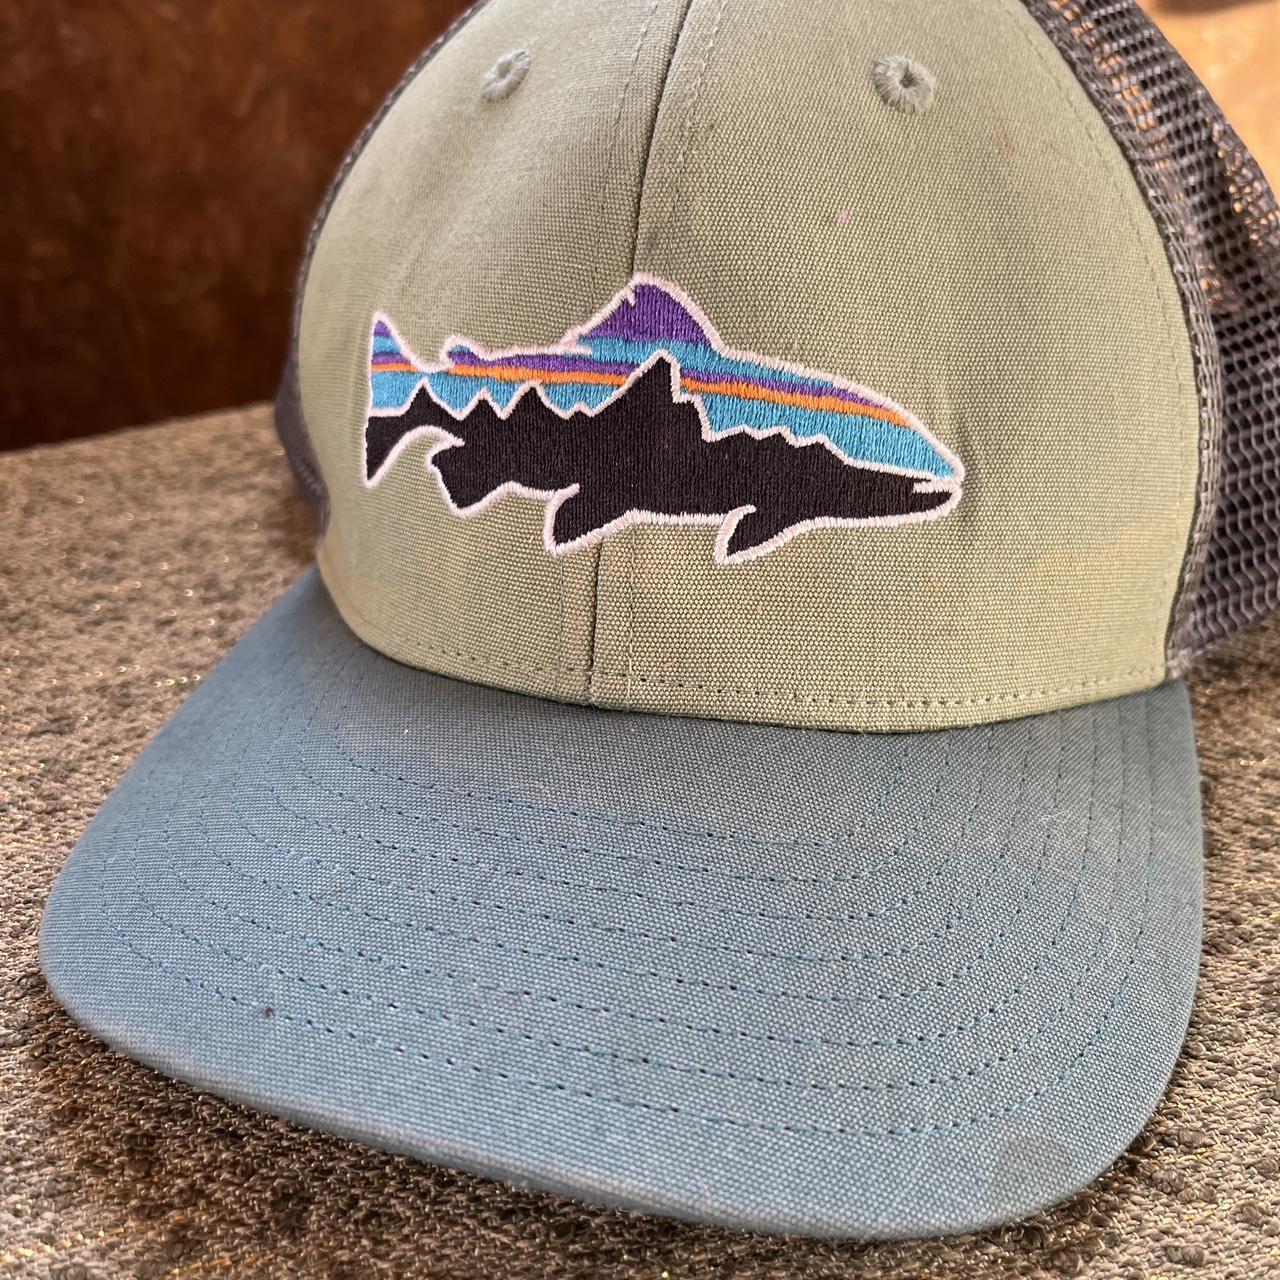 Patagonia cap with fish embroidery. Teal blue and - Depop